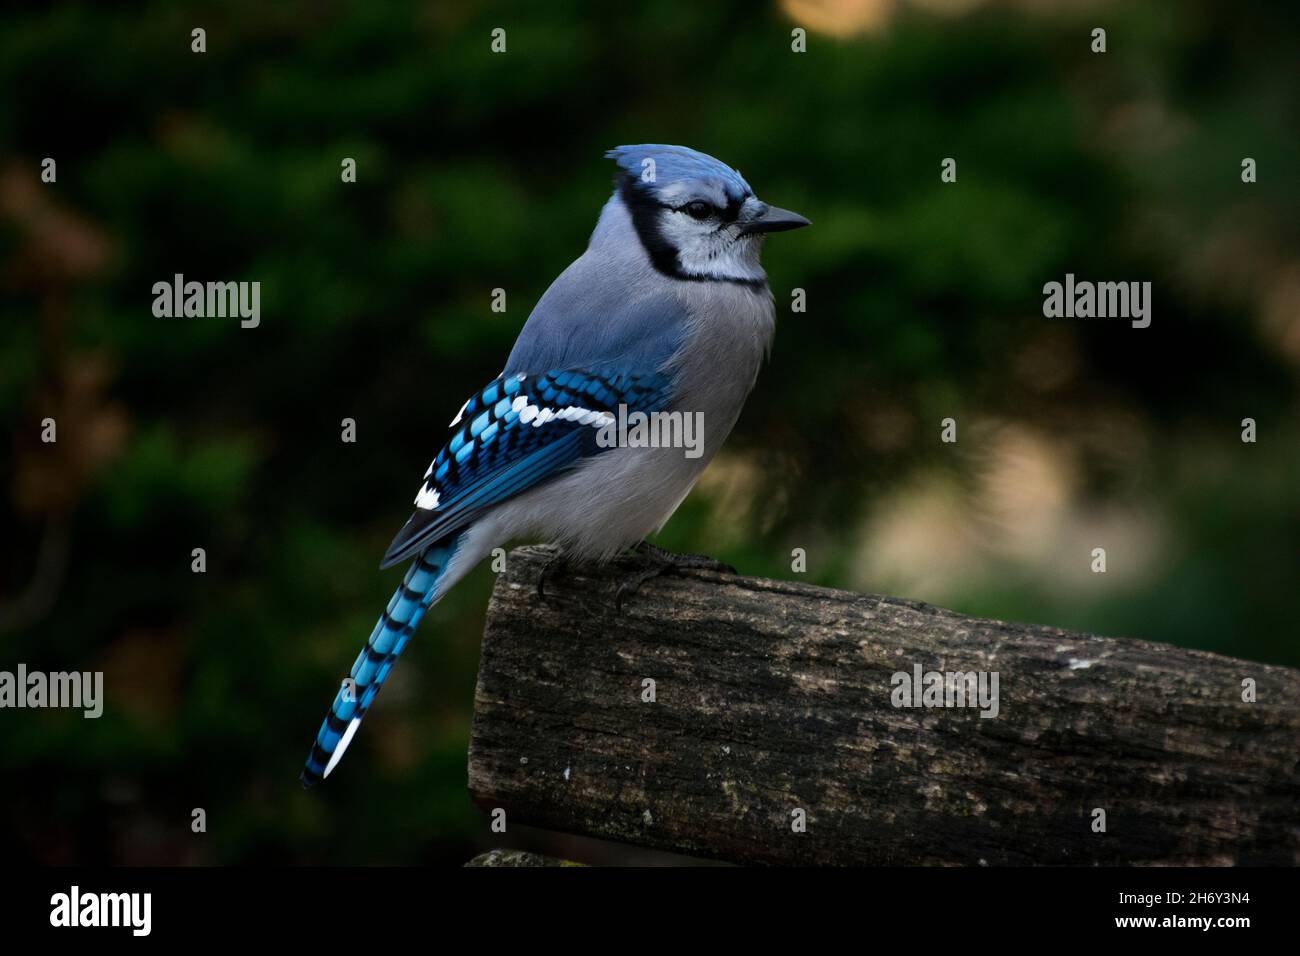 Blue jay sitting on a bench Stock Photo